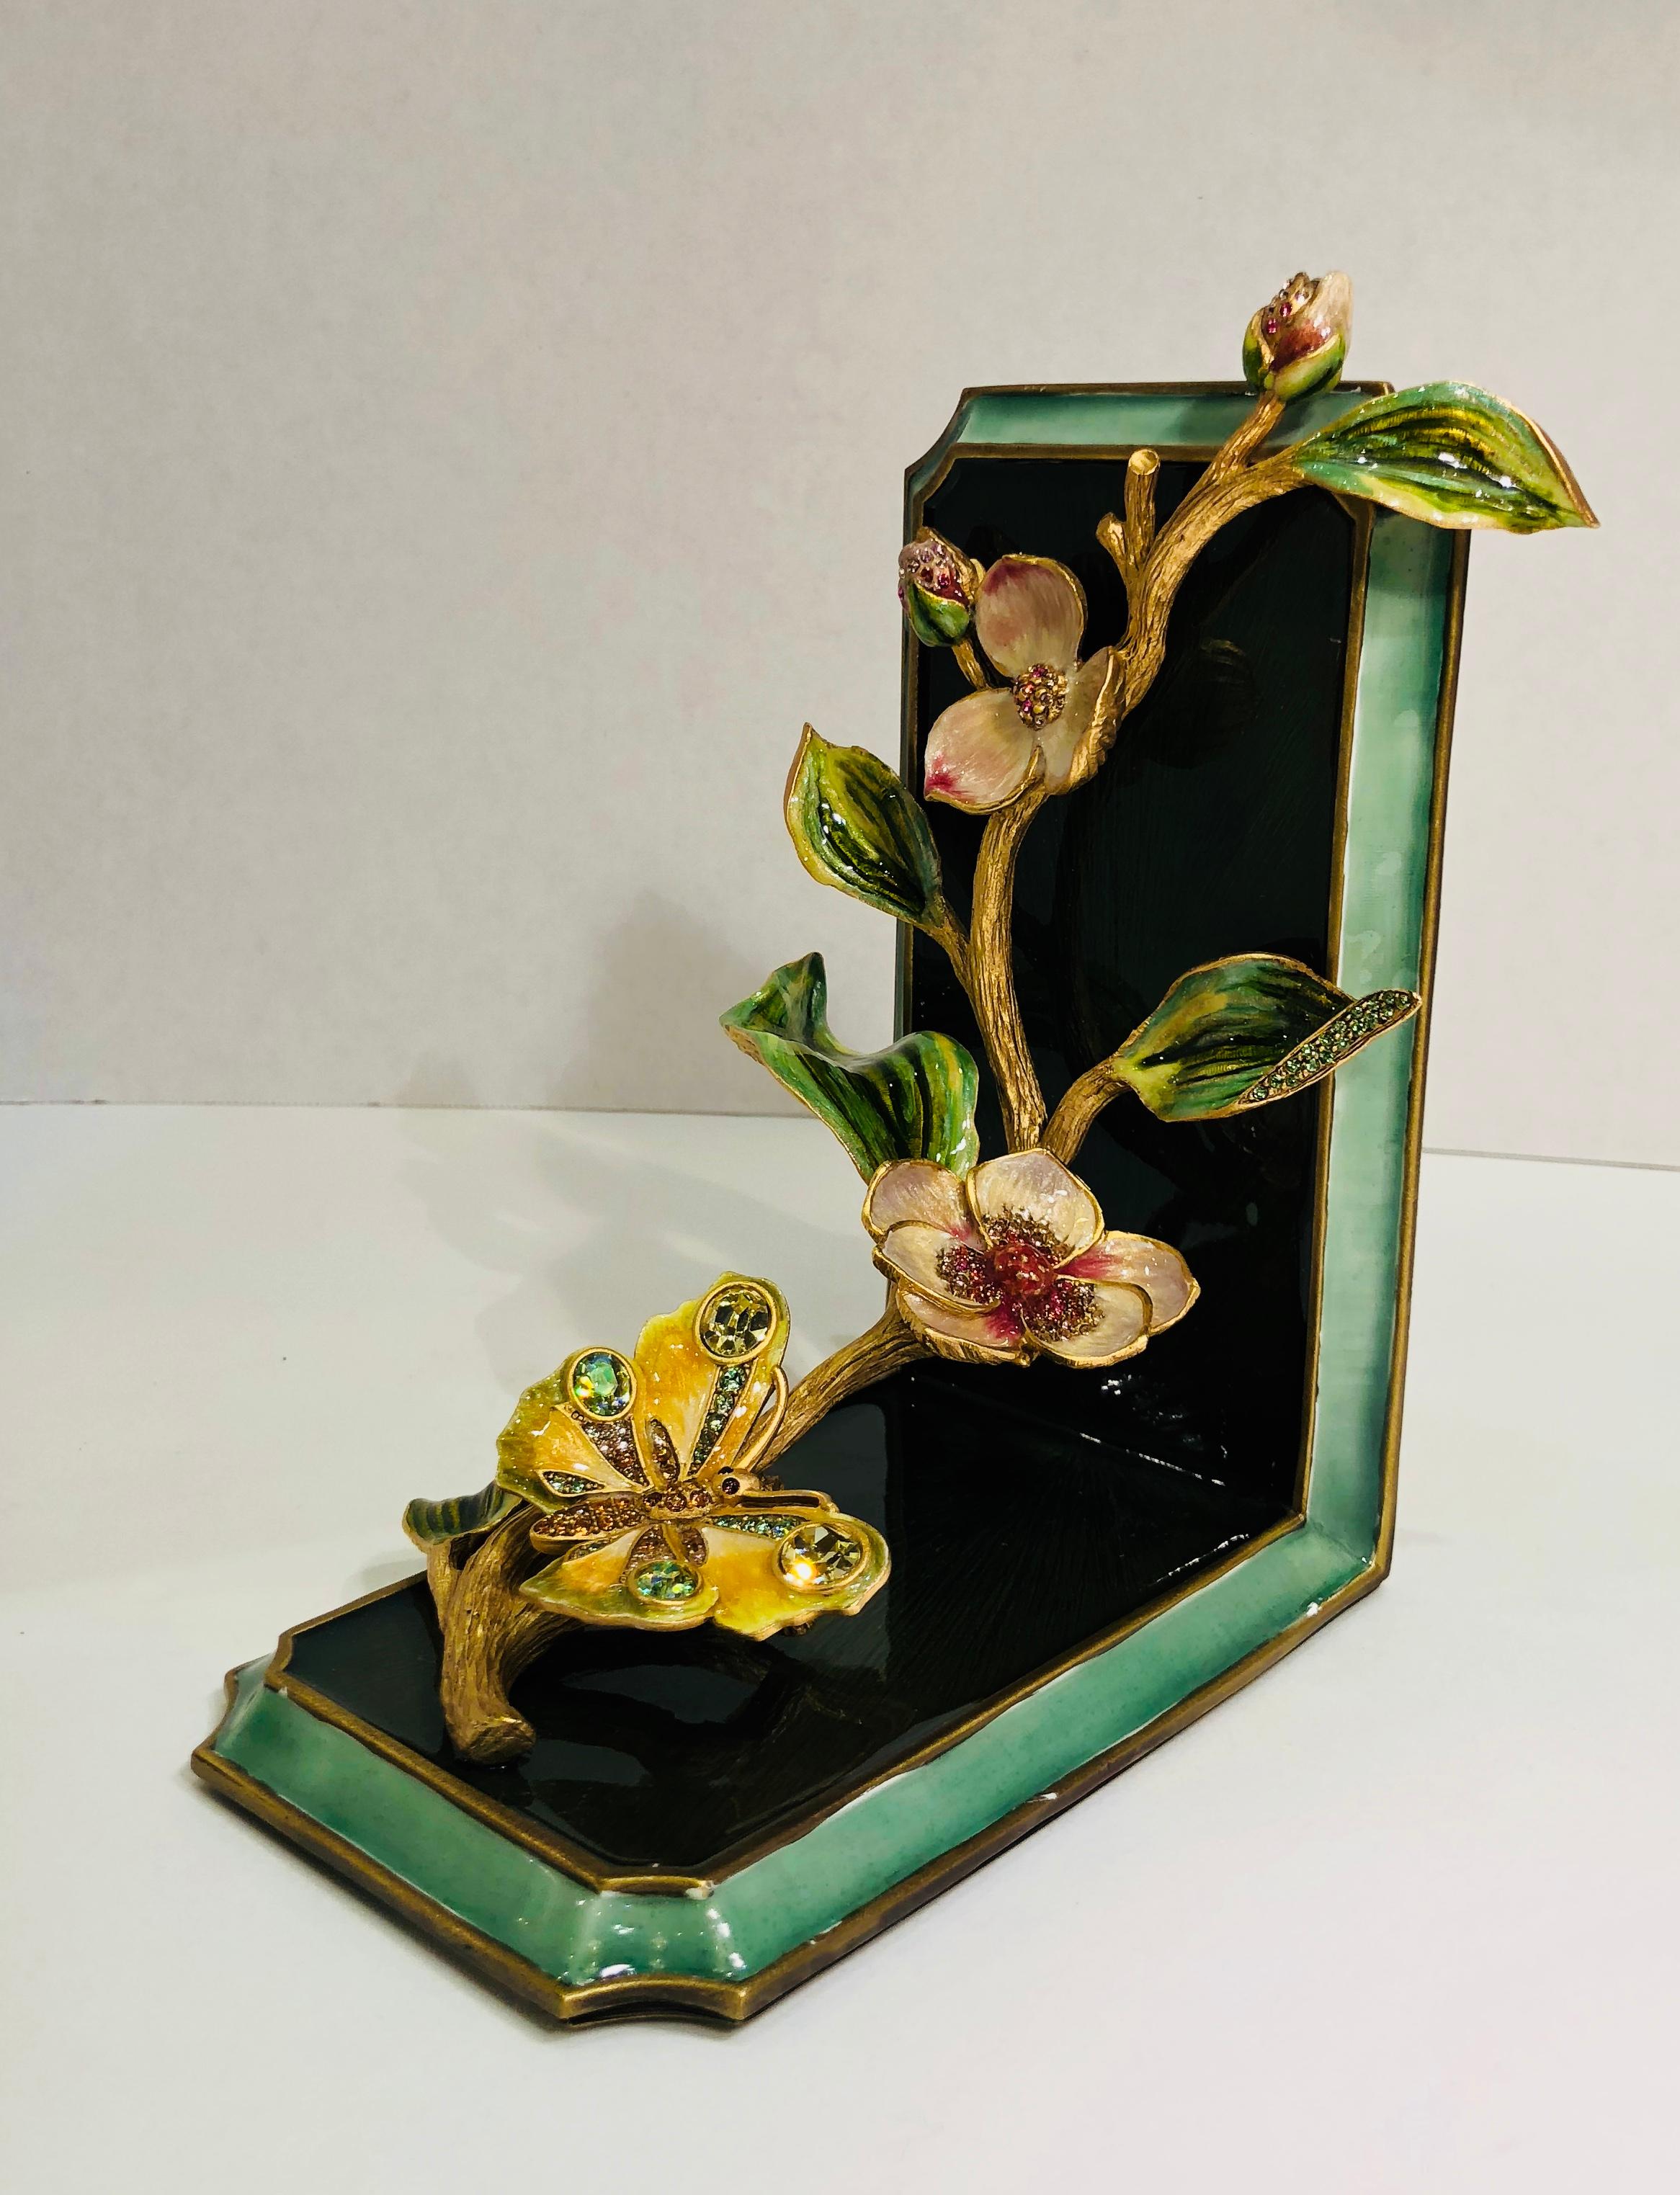 Gorgeous handmade and hand painted cast metal decorative object from the Jay Strongwater 